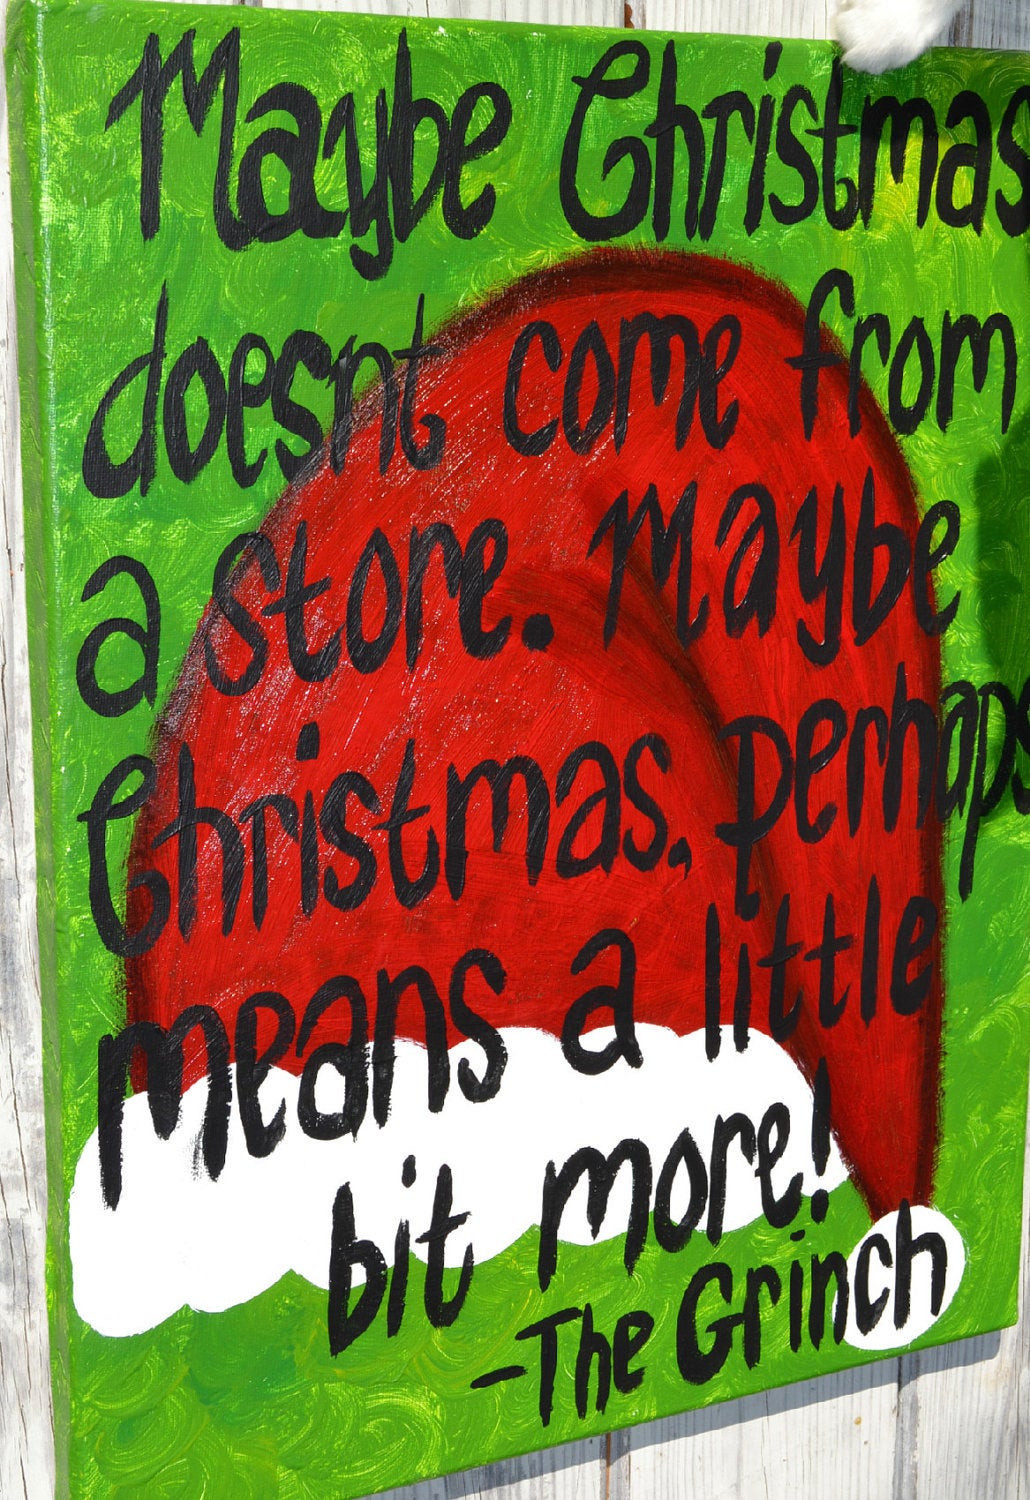 Christmas Quote From The Grinch
 Grinch Christmas Quote on 16x20 Canvas